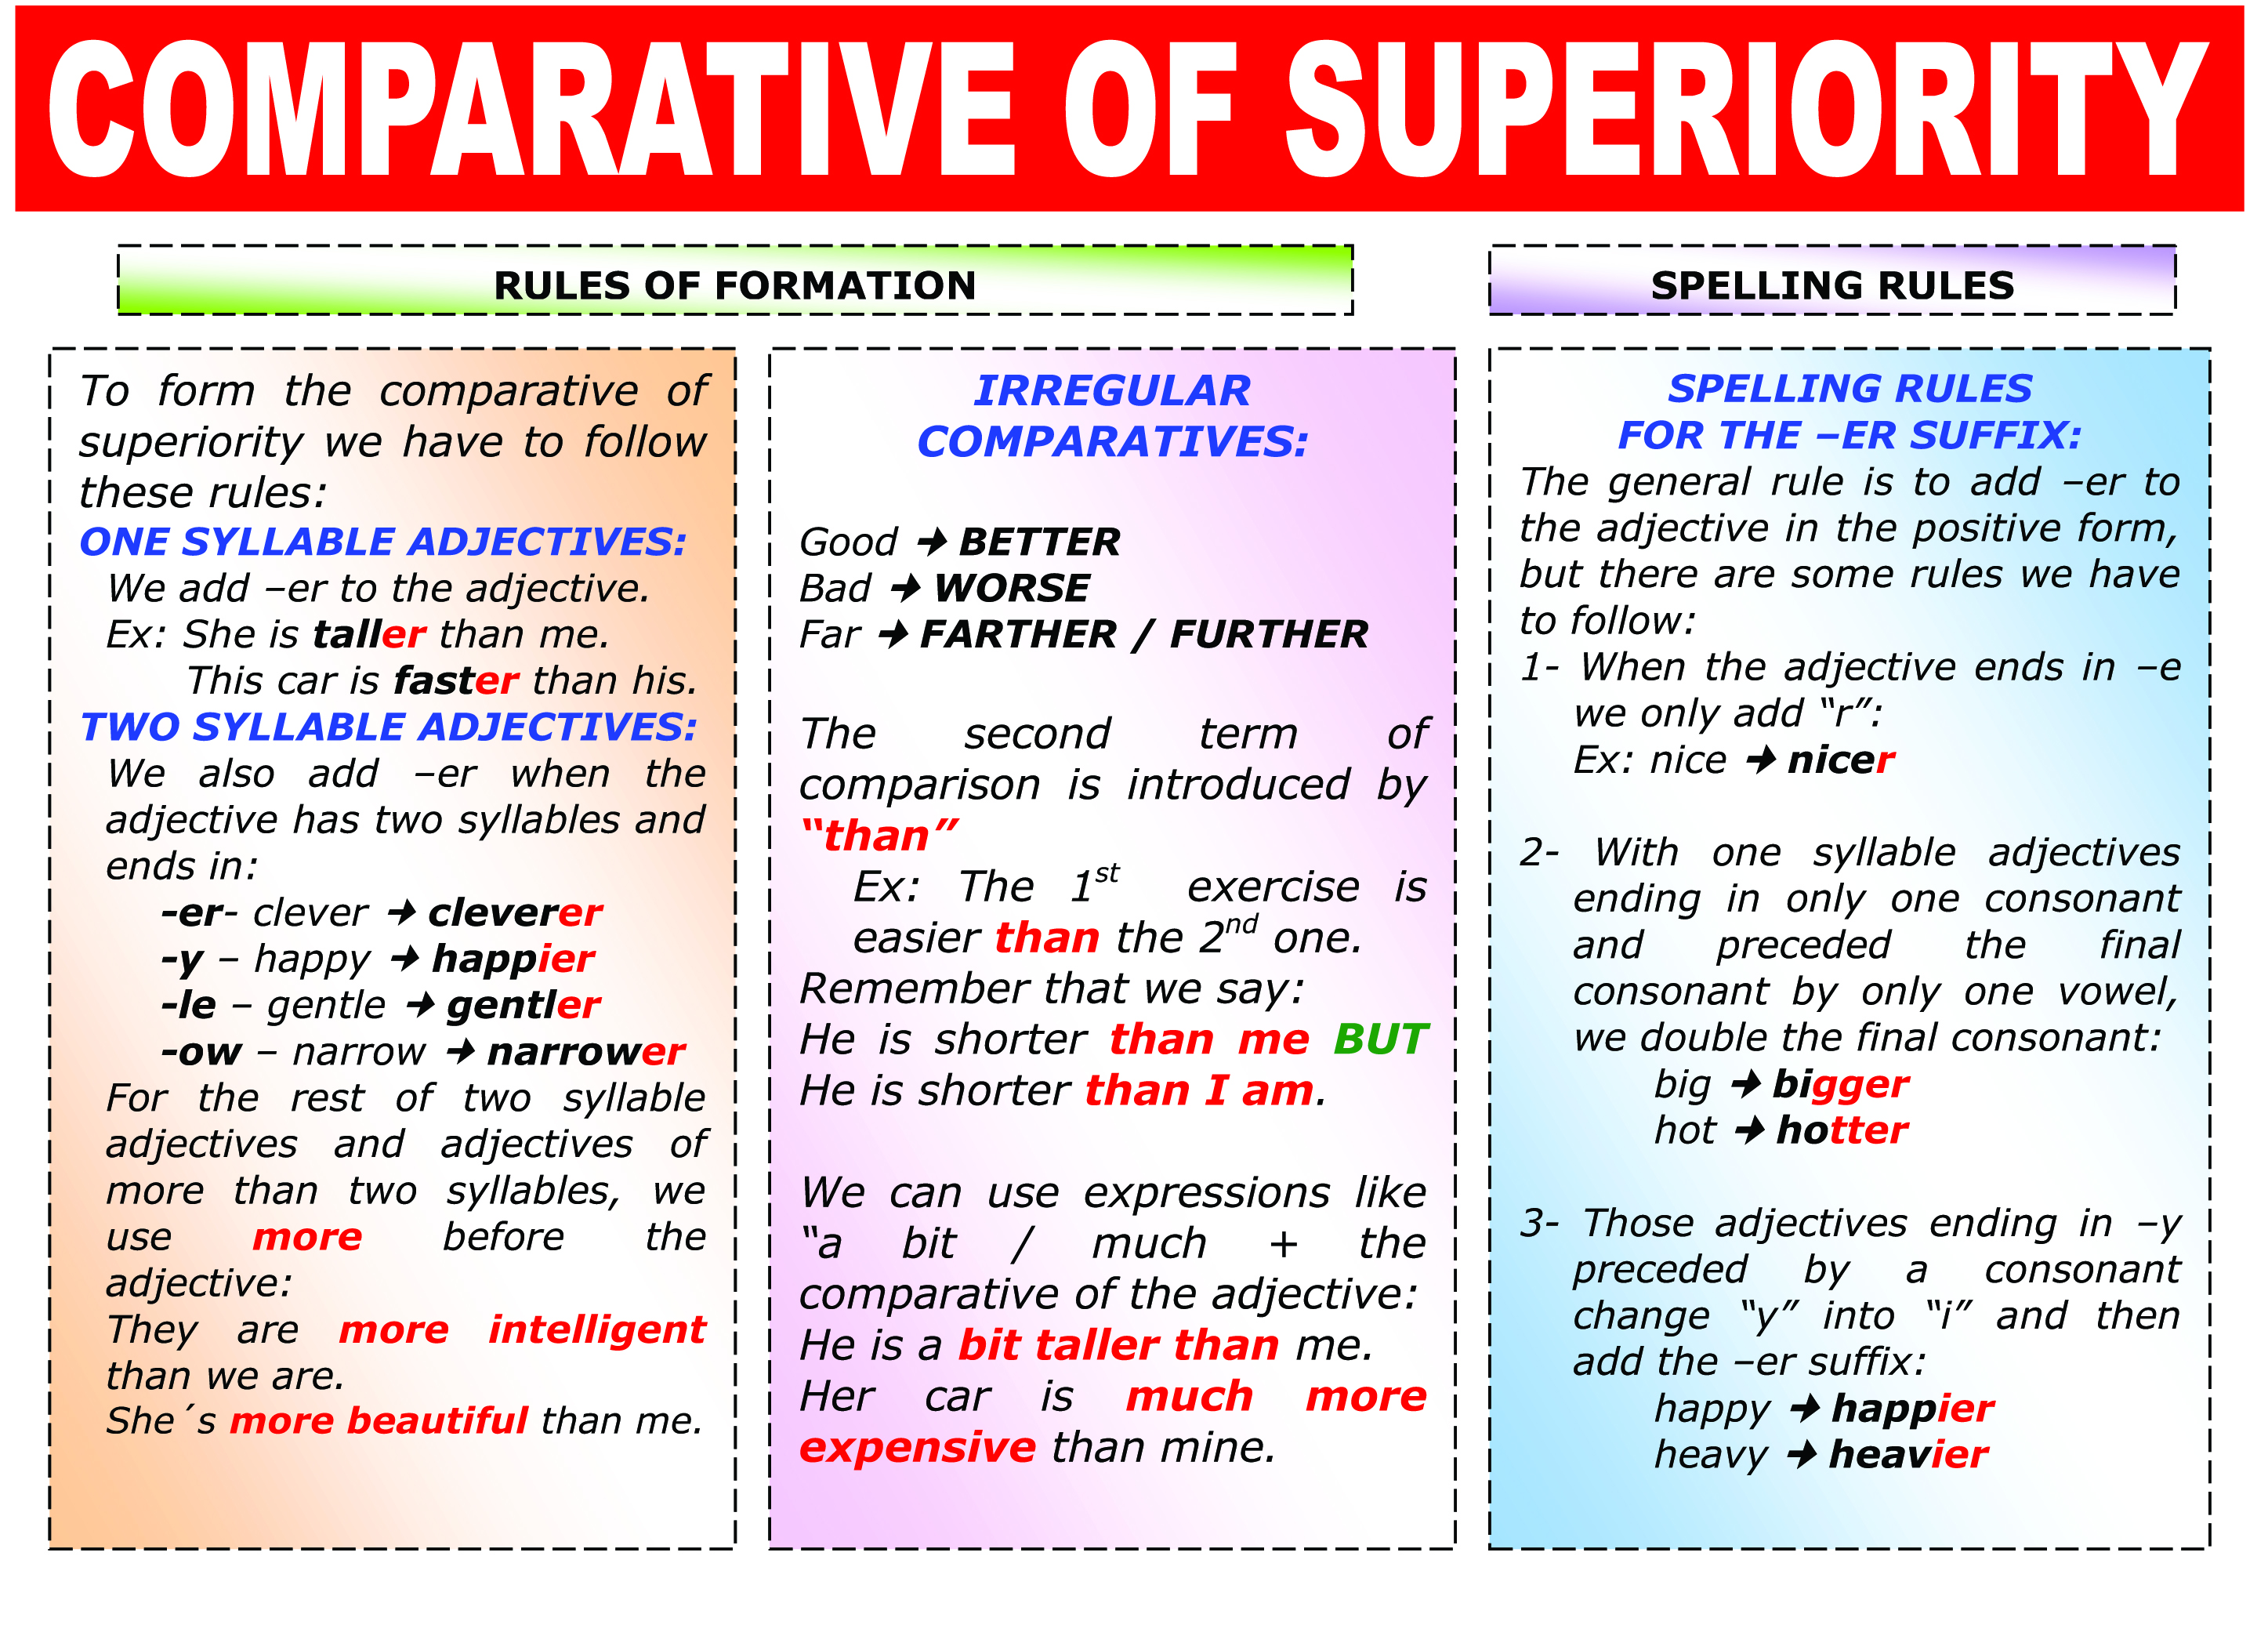 Adjectives rules. Comparative of superiority. Comparisons правило. Comparative adjectives Rule. Comparison of adjectives.